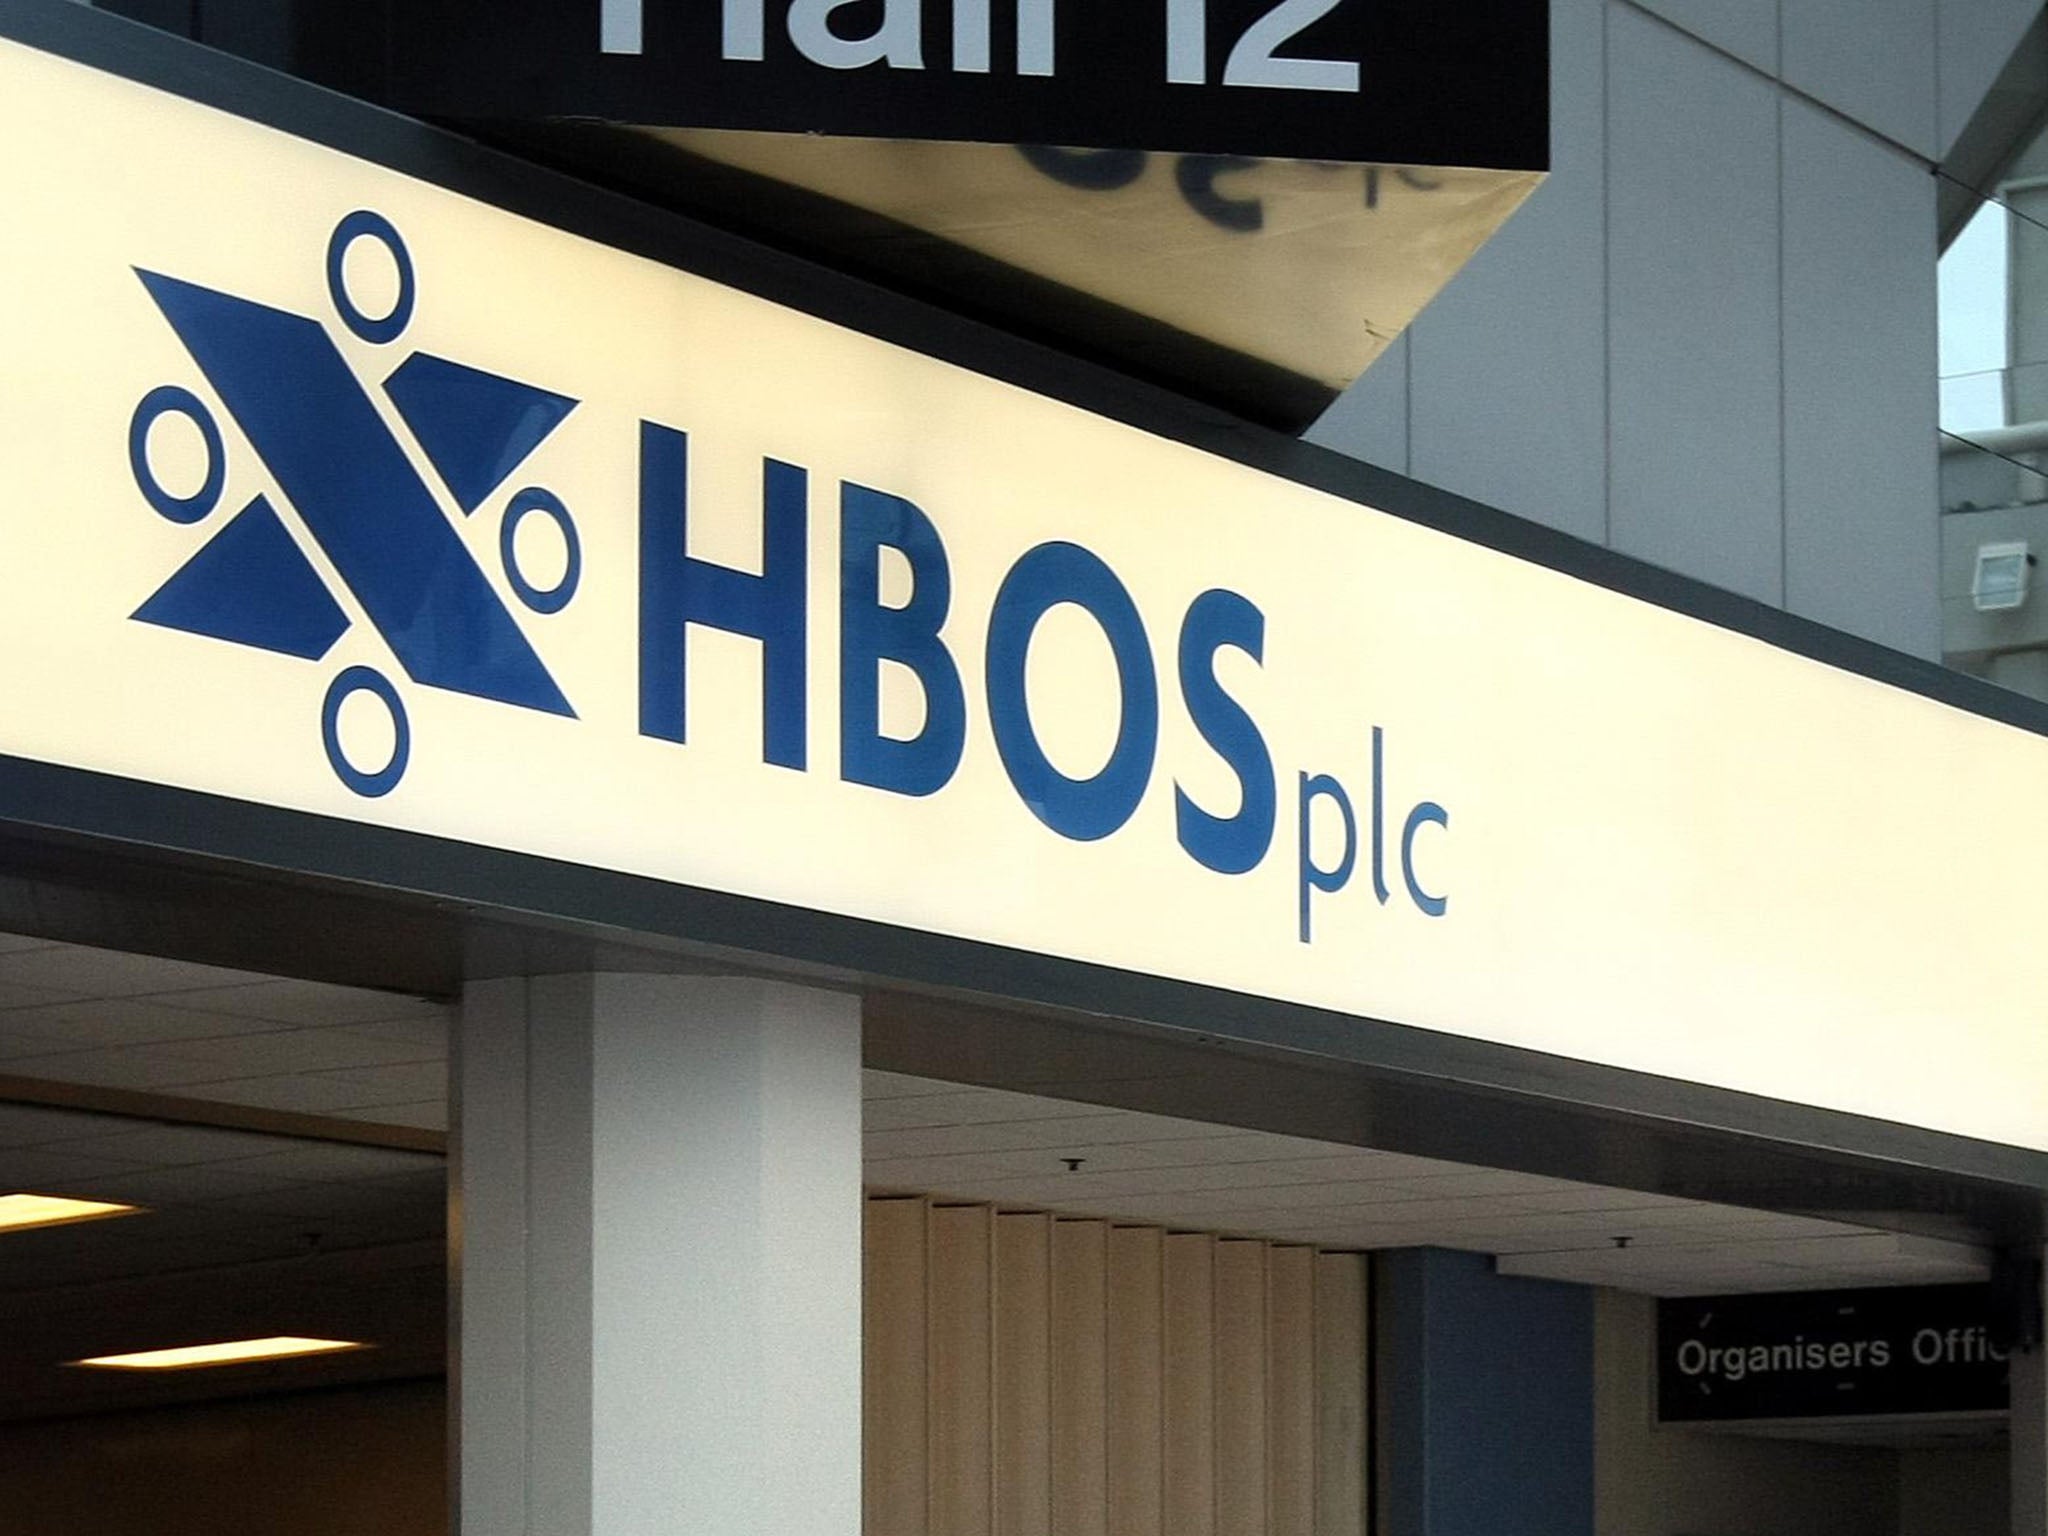 Lloyds acquired HBOS where the fraud was committed in 2008, but is not compensating all of those affected, according to the SME Alliance